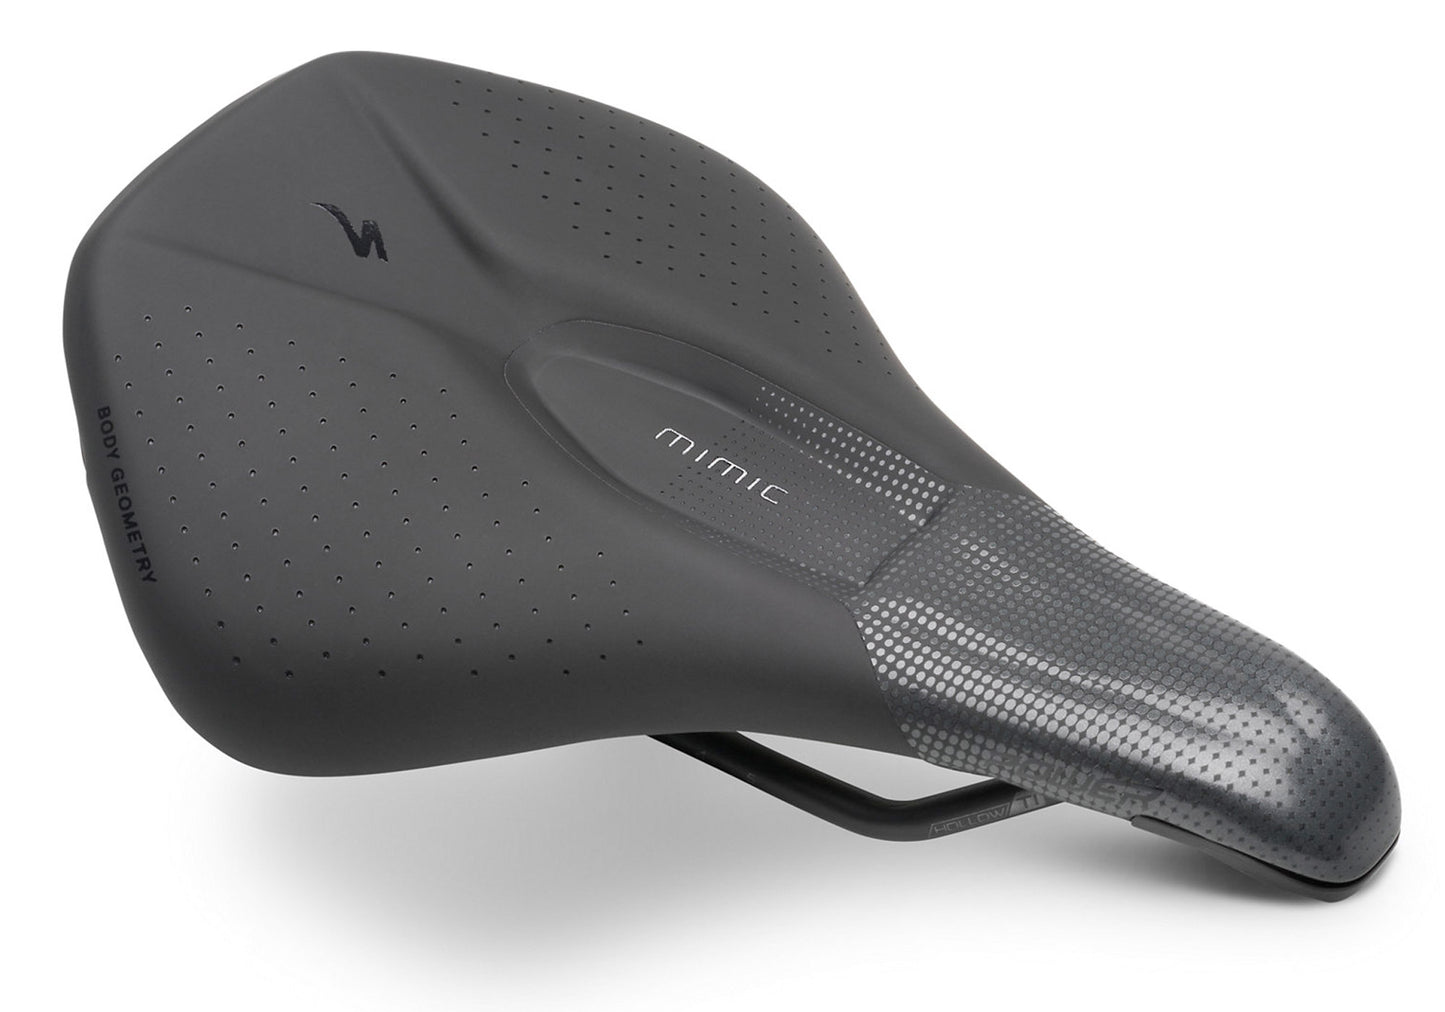 Specialized Women's Power Pro Road Saddle With Mimic, 155mm Width